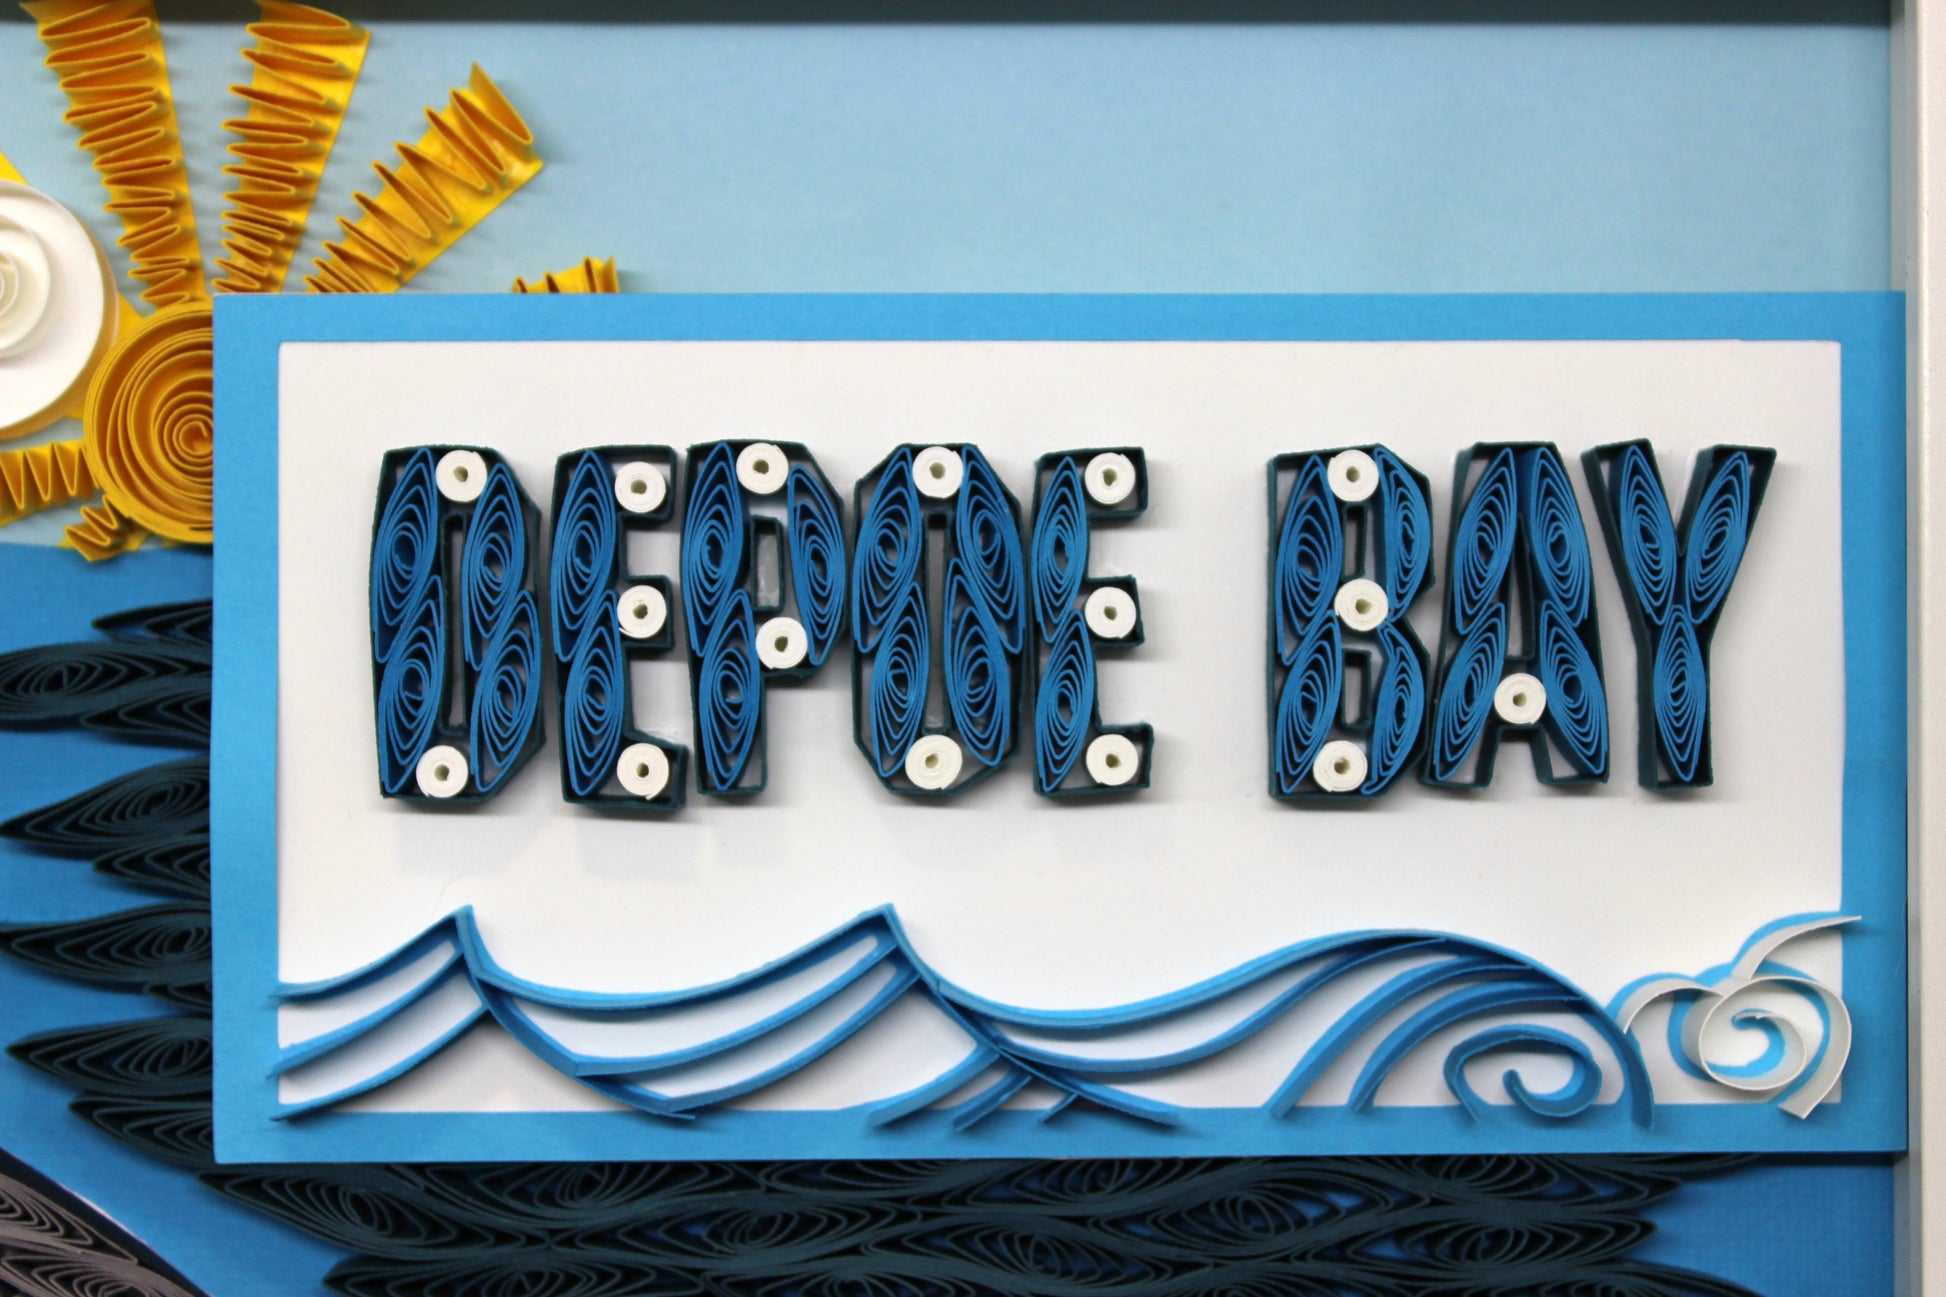 close up detail of quilled "Depoe Bay" sign